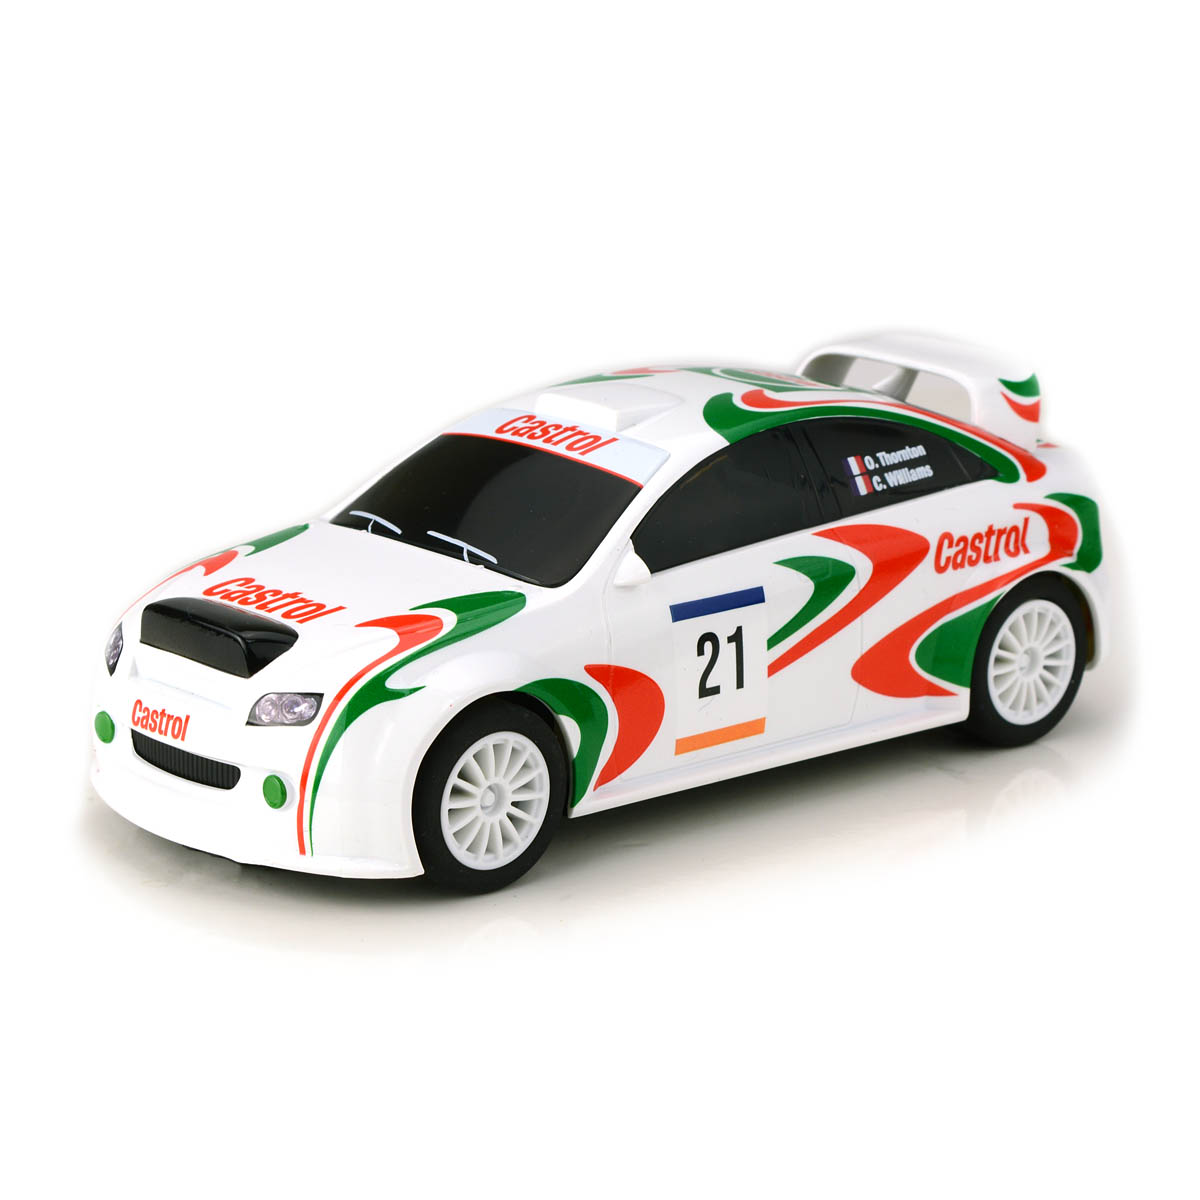 Scalextric C4302 Castrol Rally Slot Racing car, Green/Red/White, 1:32 Scale